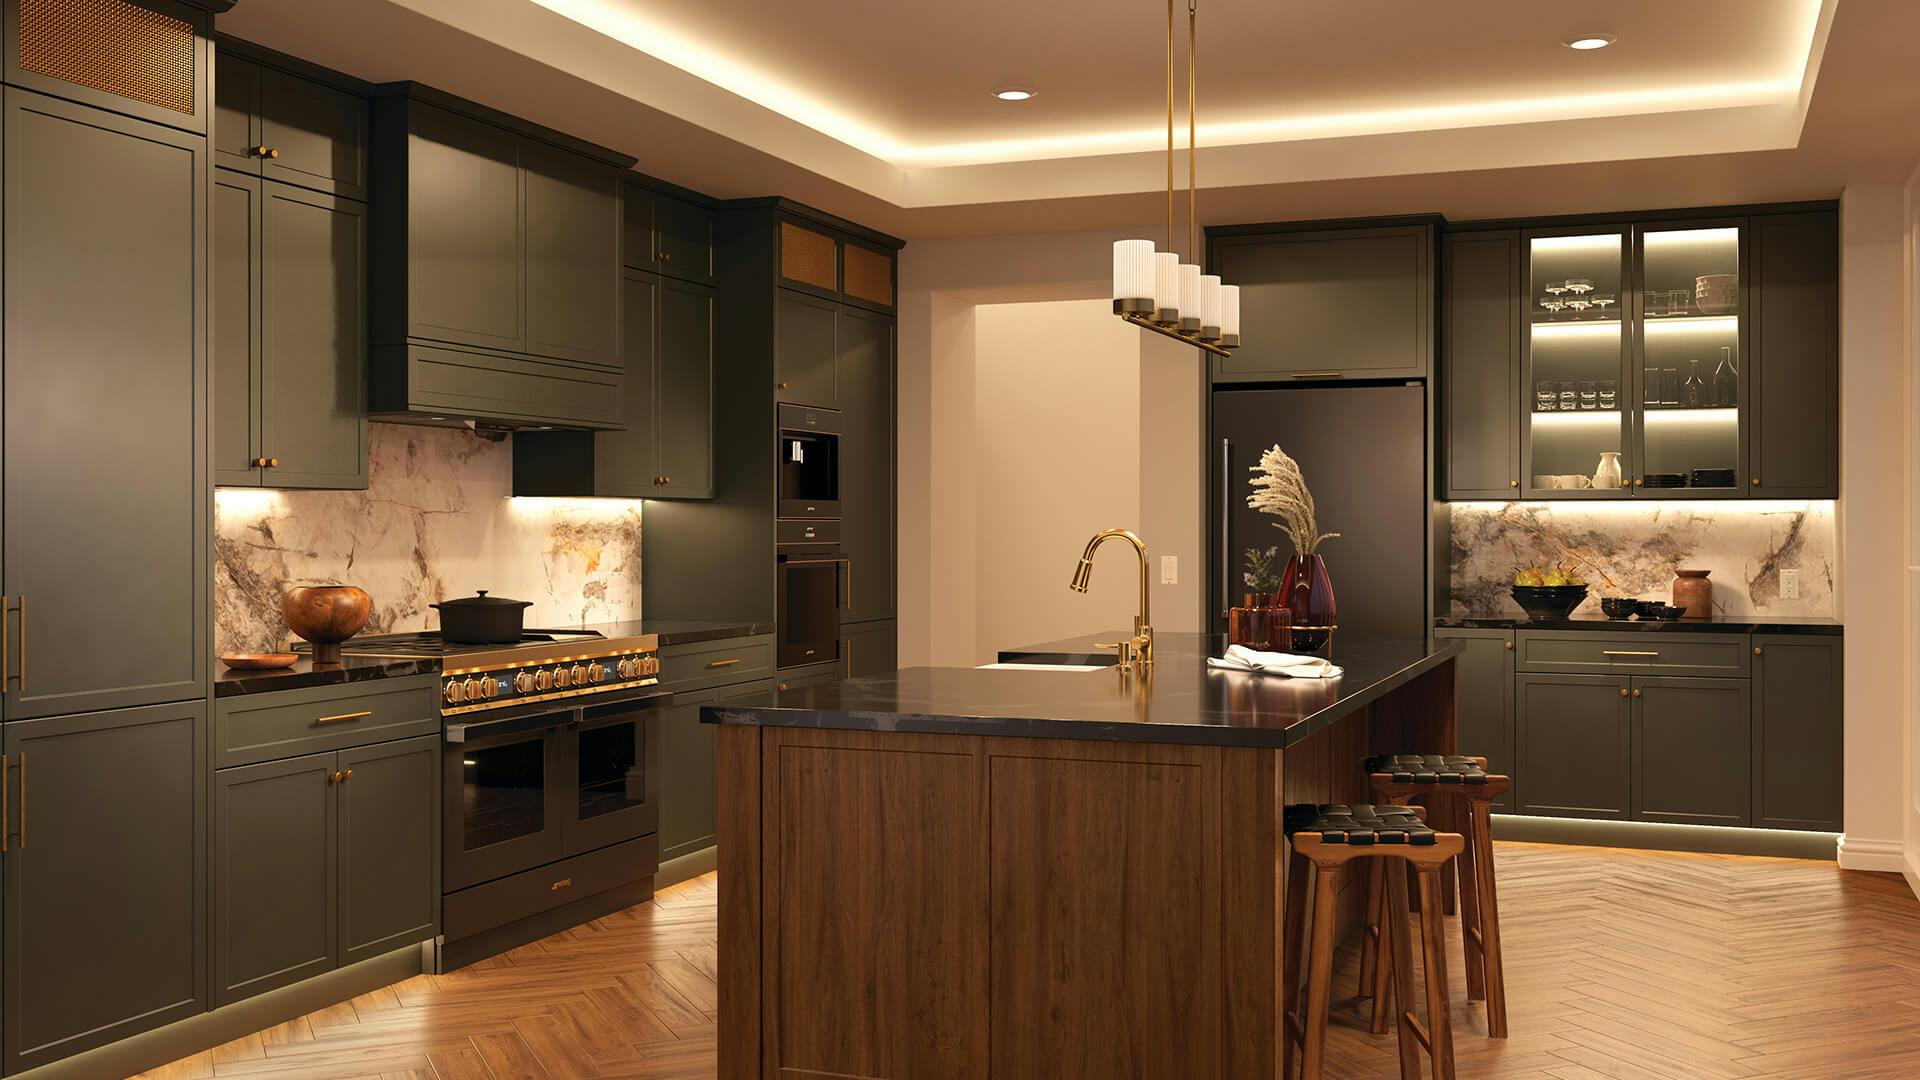 Kitchen with island in the middle and variety of cabinet and channel lights.